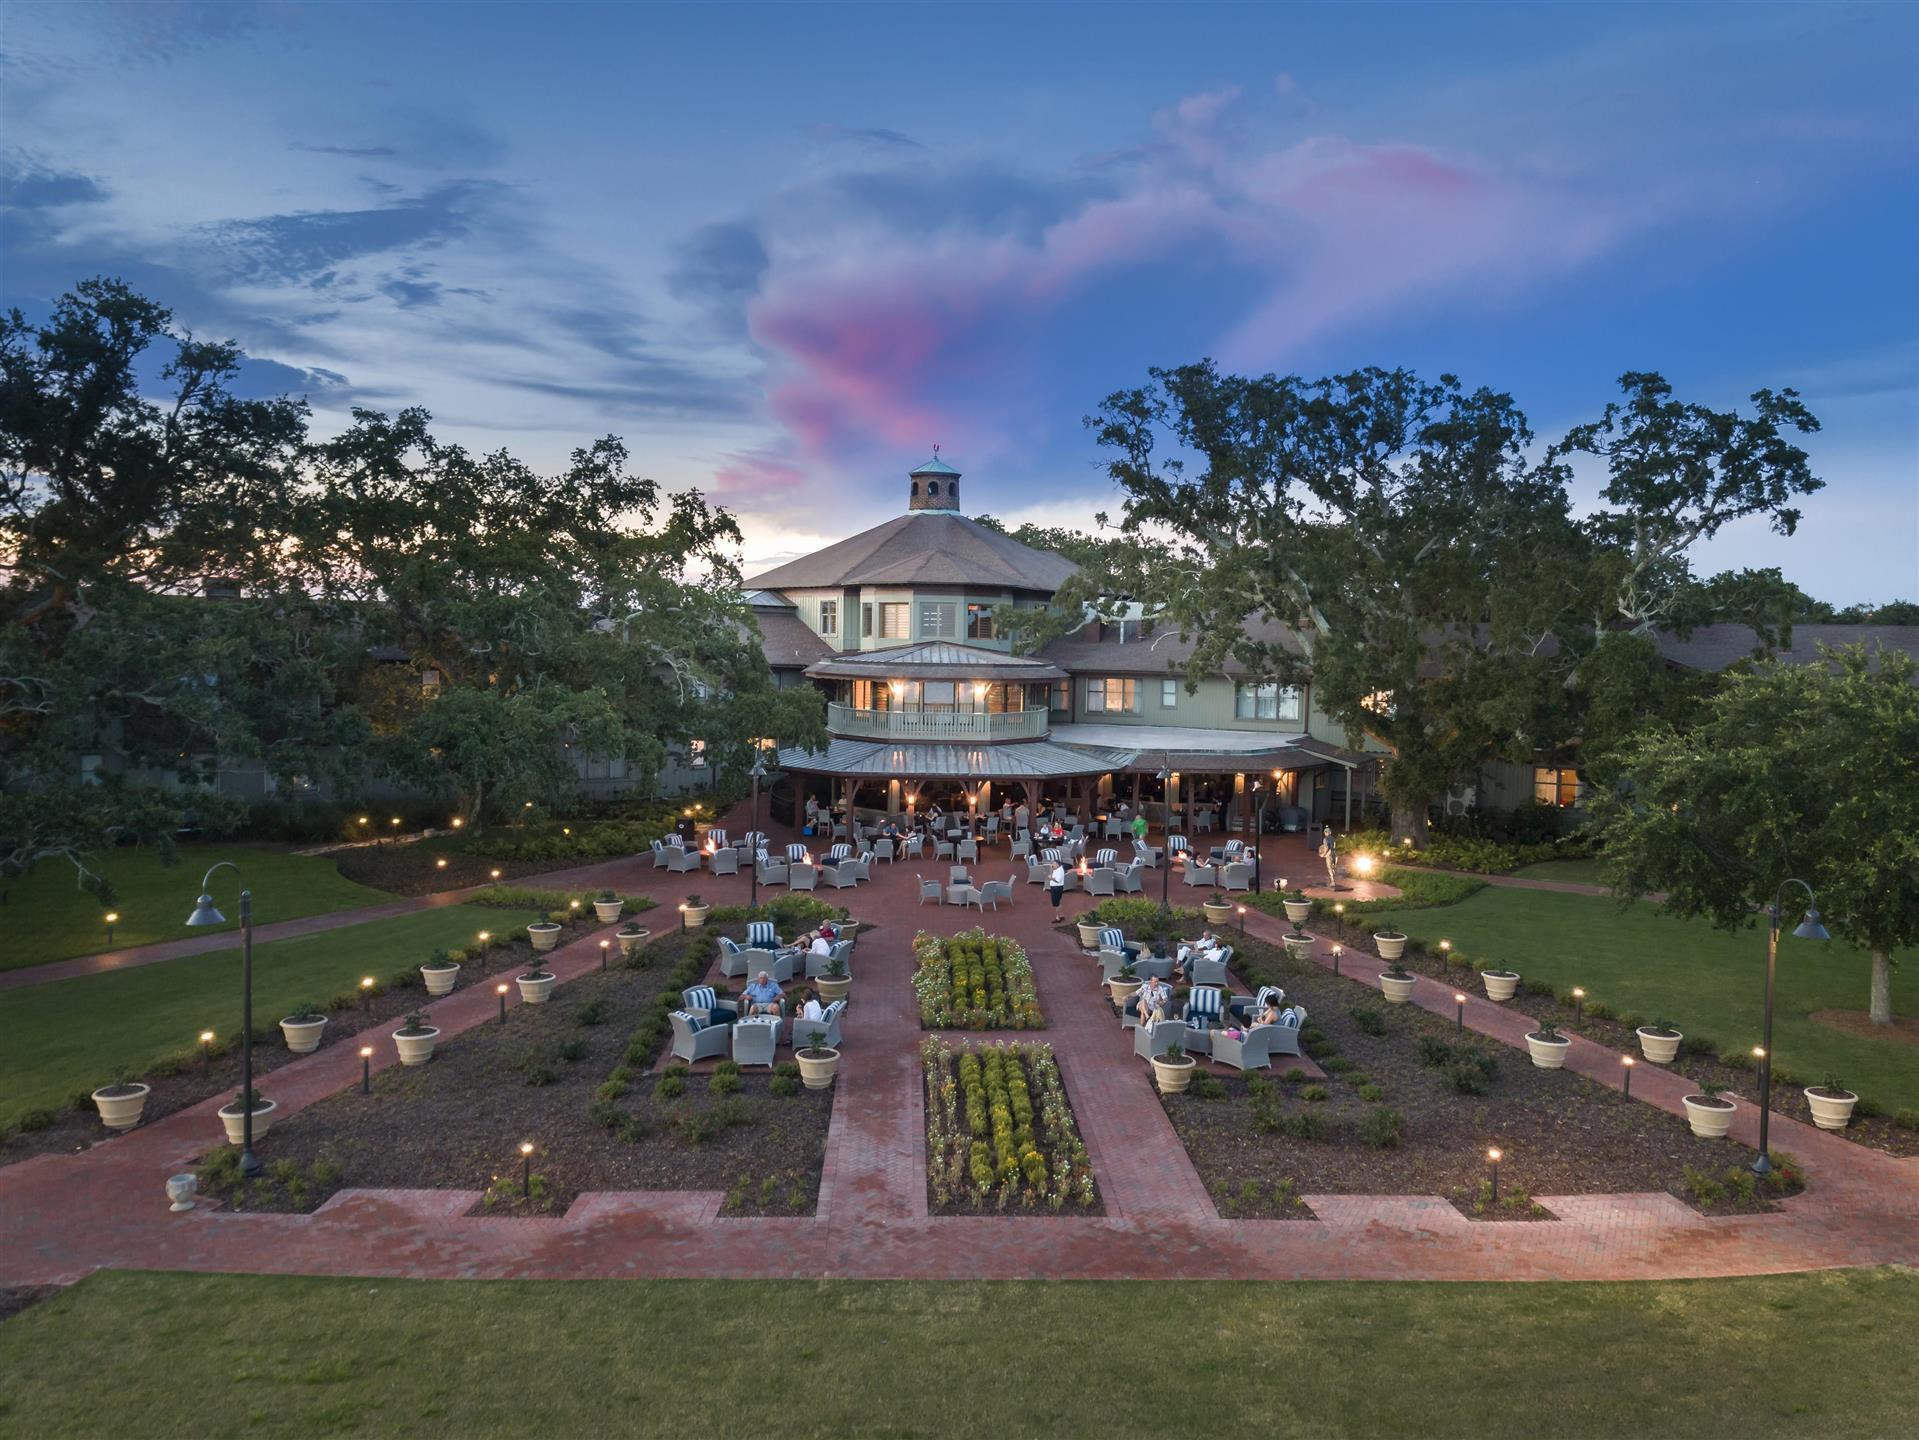 Grand Hotel Golf Resort & Spa, Autograph Collection in Pt. Clear, AL